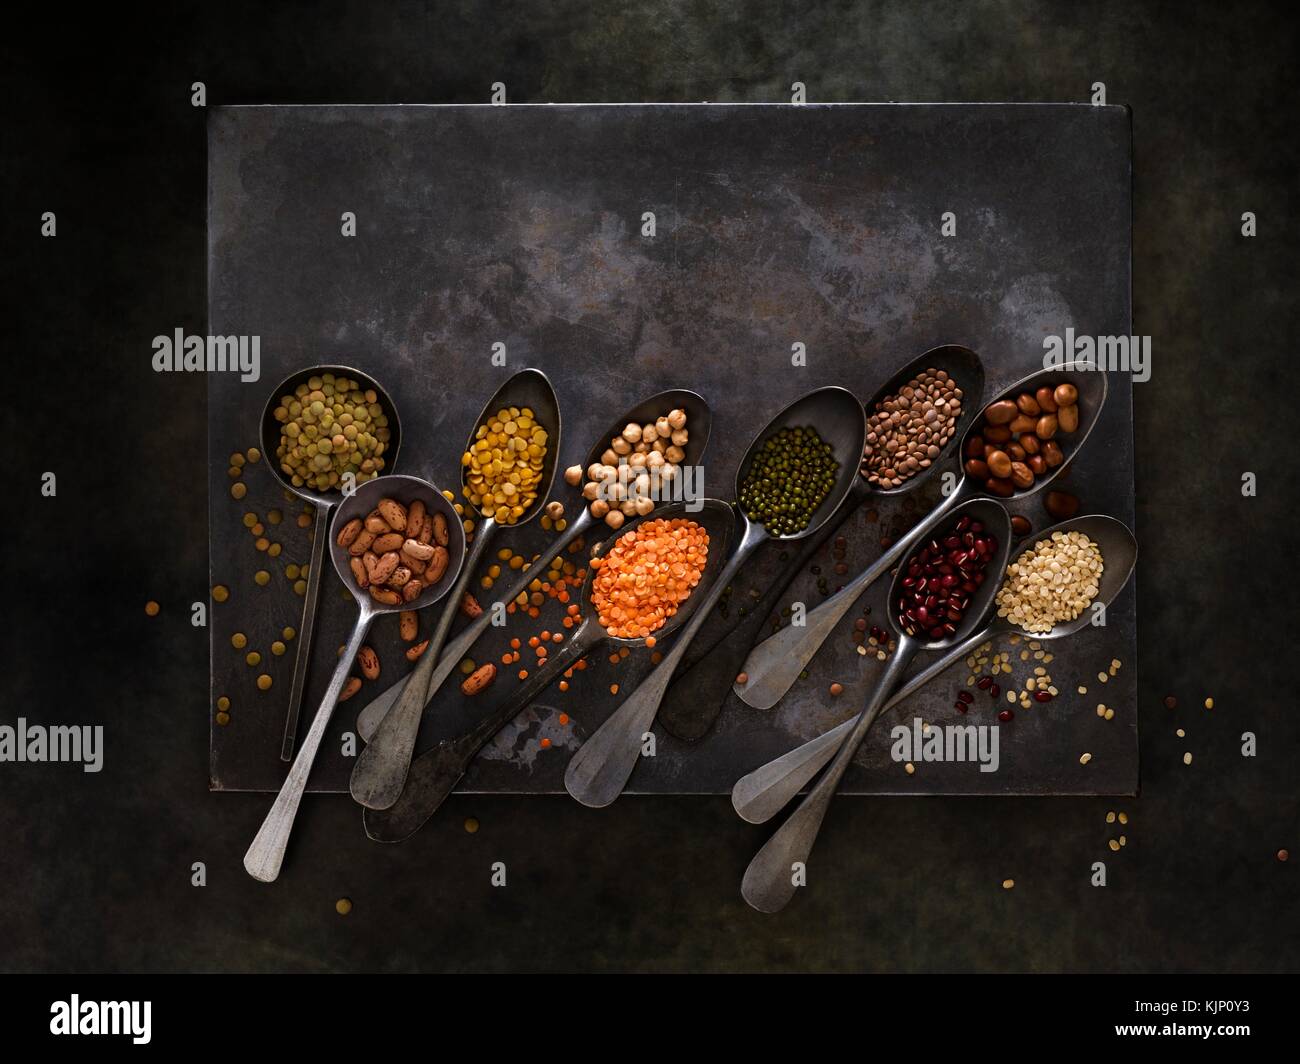 Pulses on metal spoons, overhead view. Stock Photo